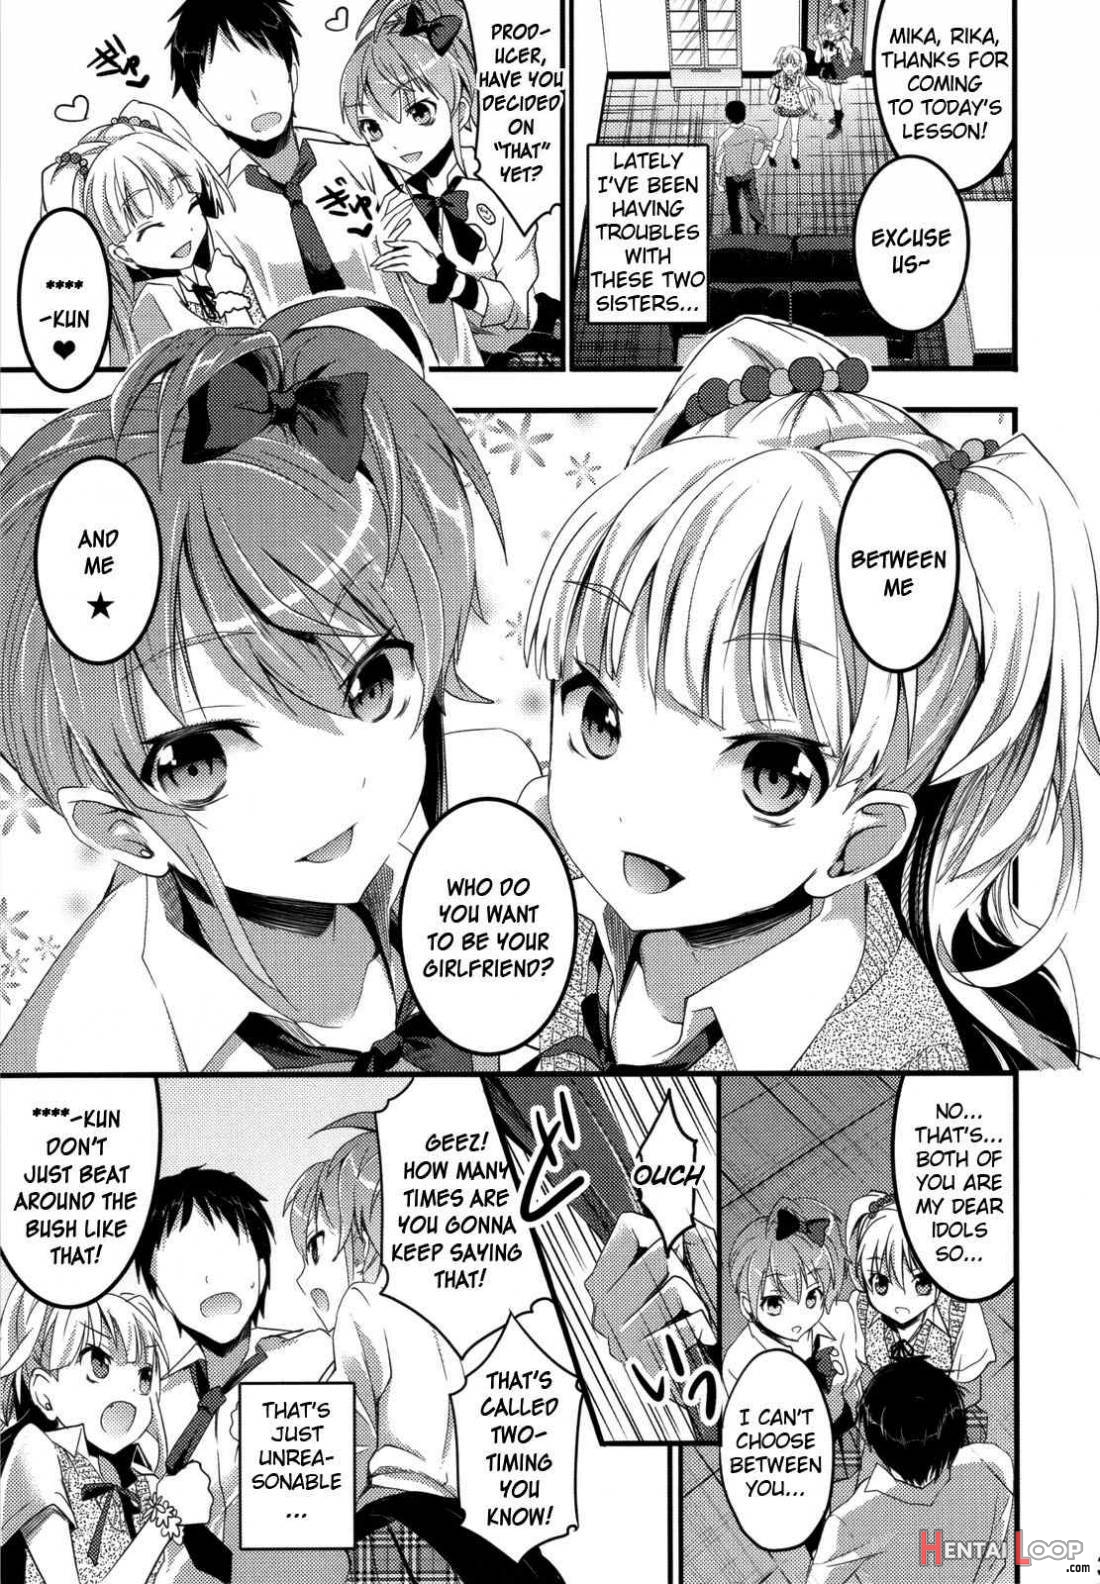 The Jougasaki Sisters’ All-out Love Attack + Omake page 2